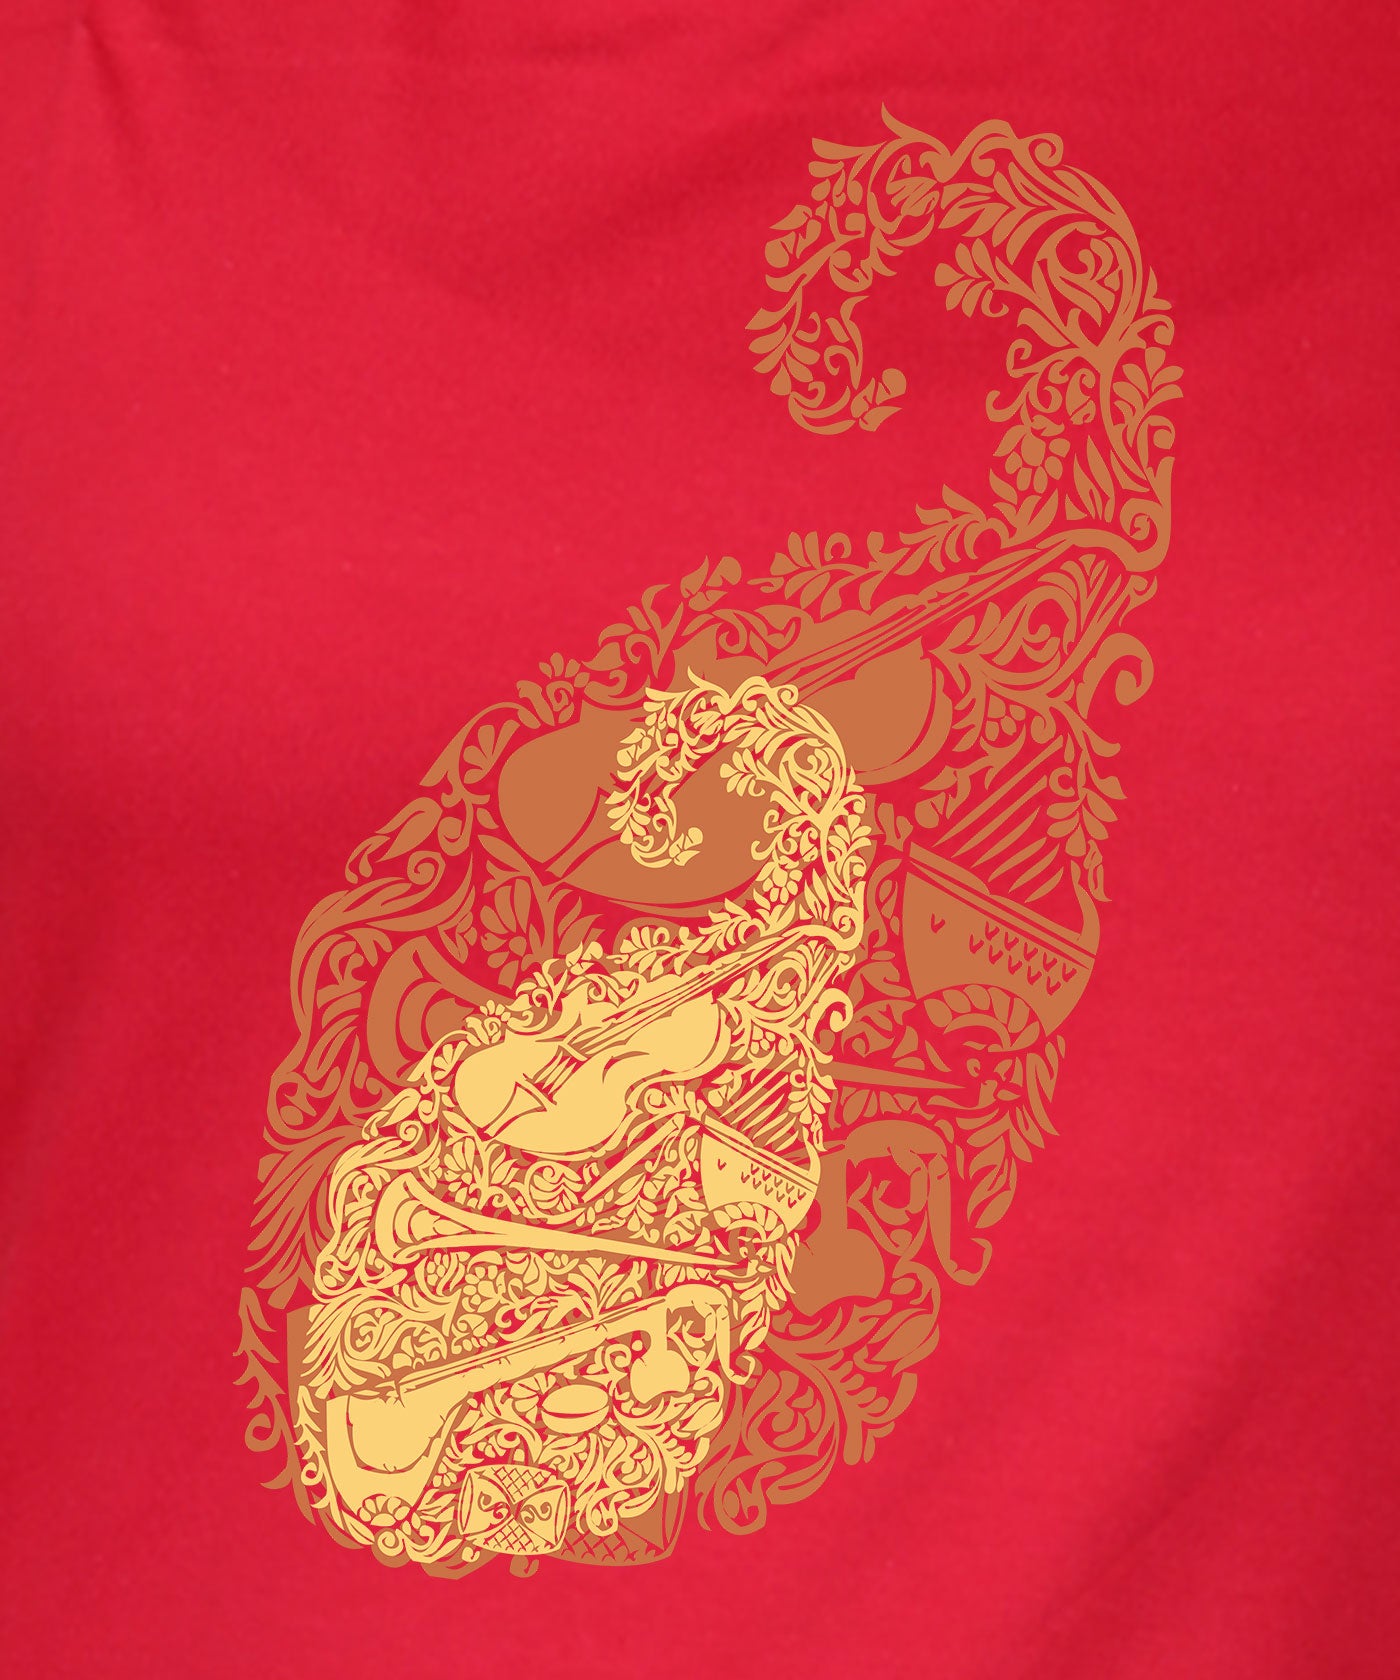 Musical Harmony - Premium Round Neck Cotton Tees for Women - Red